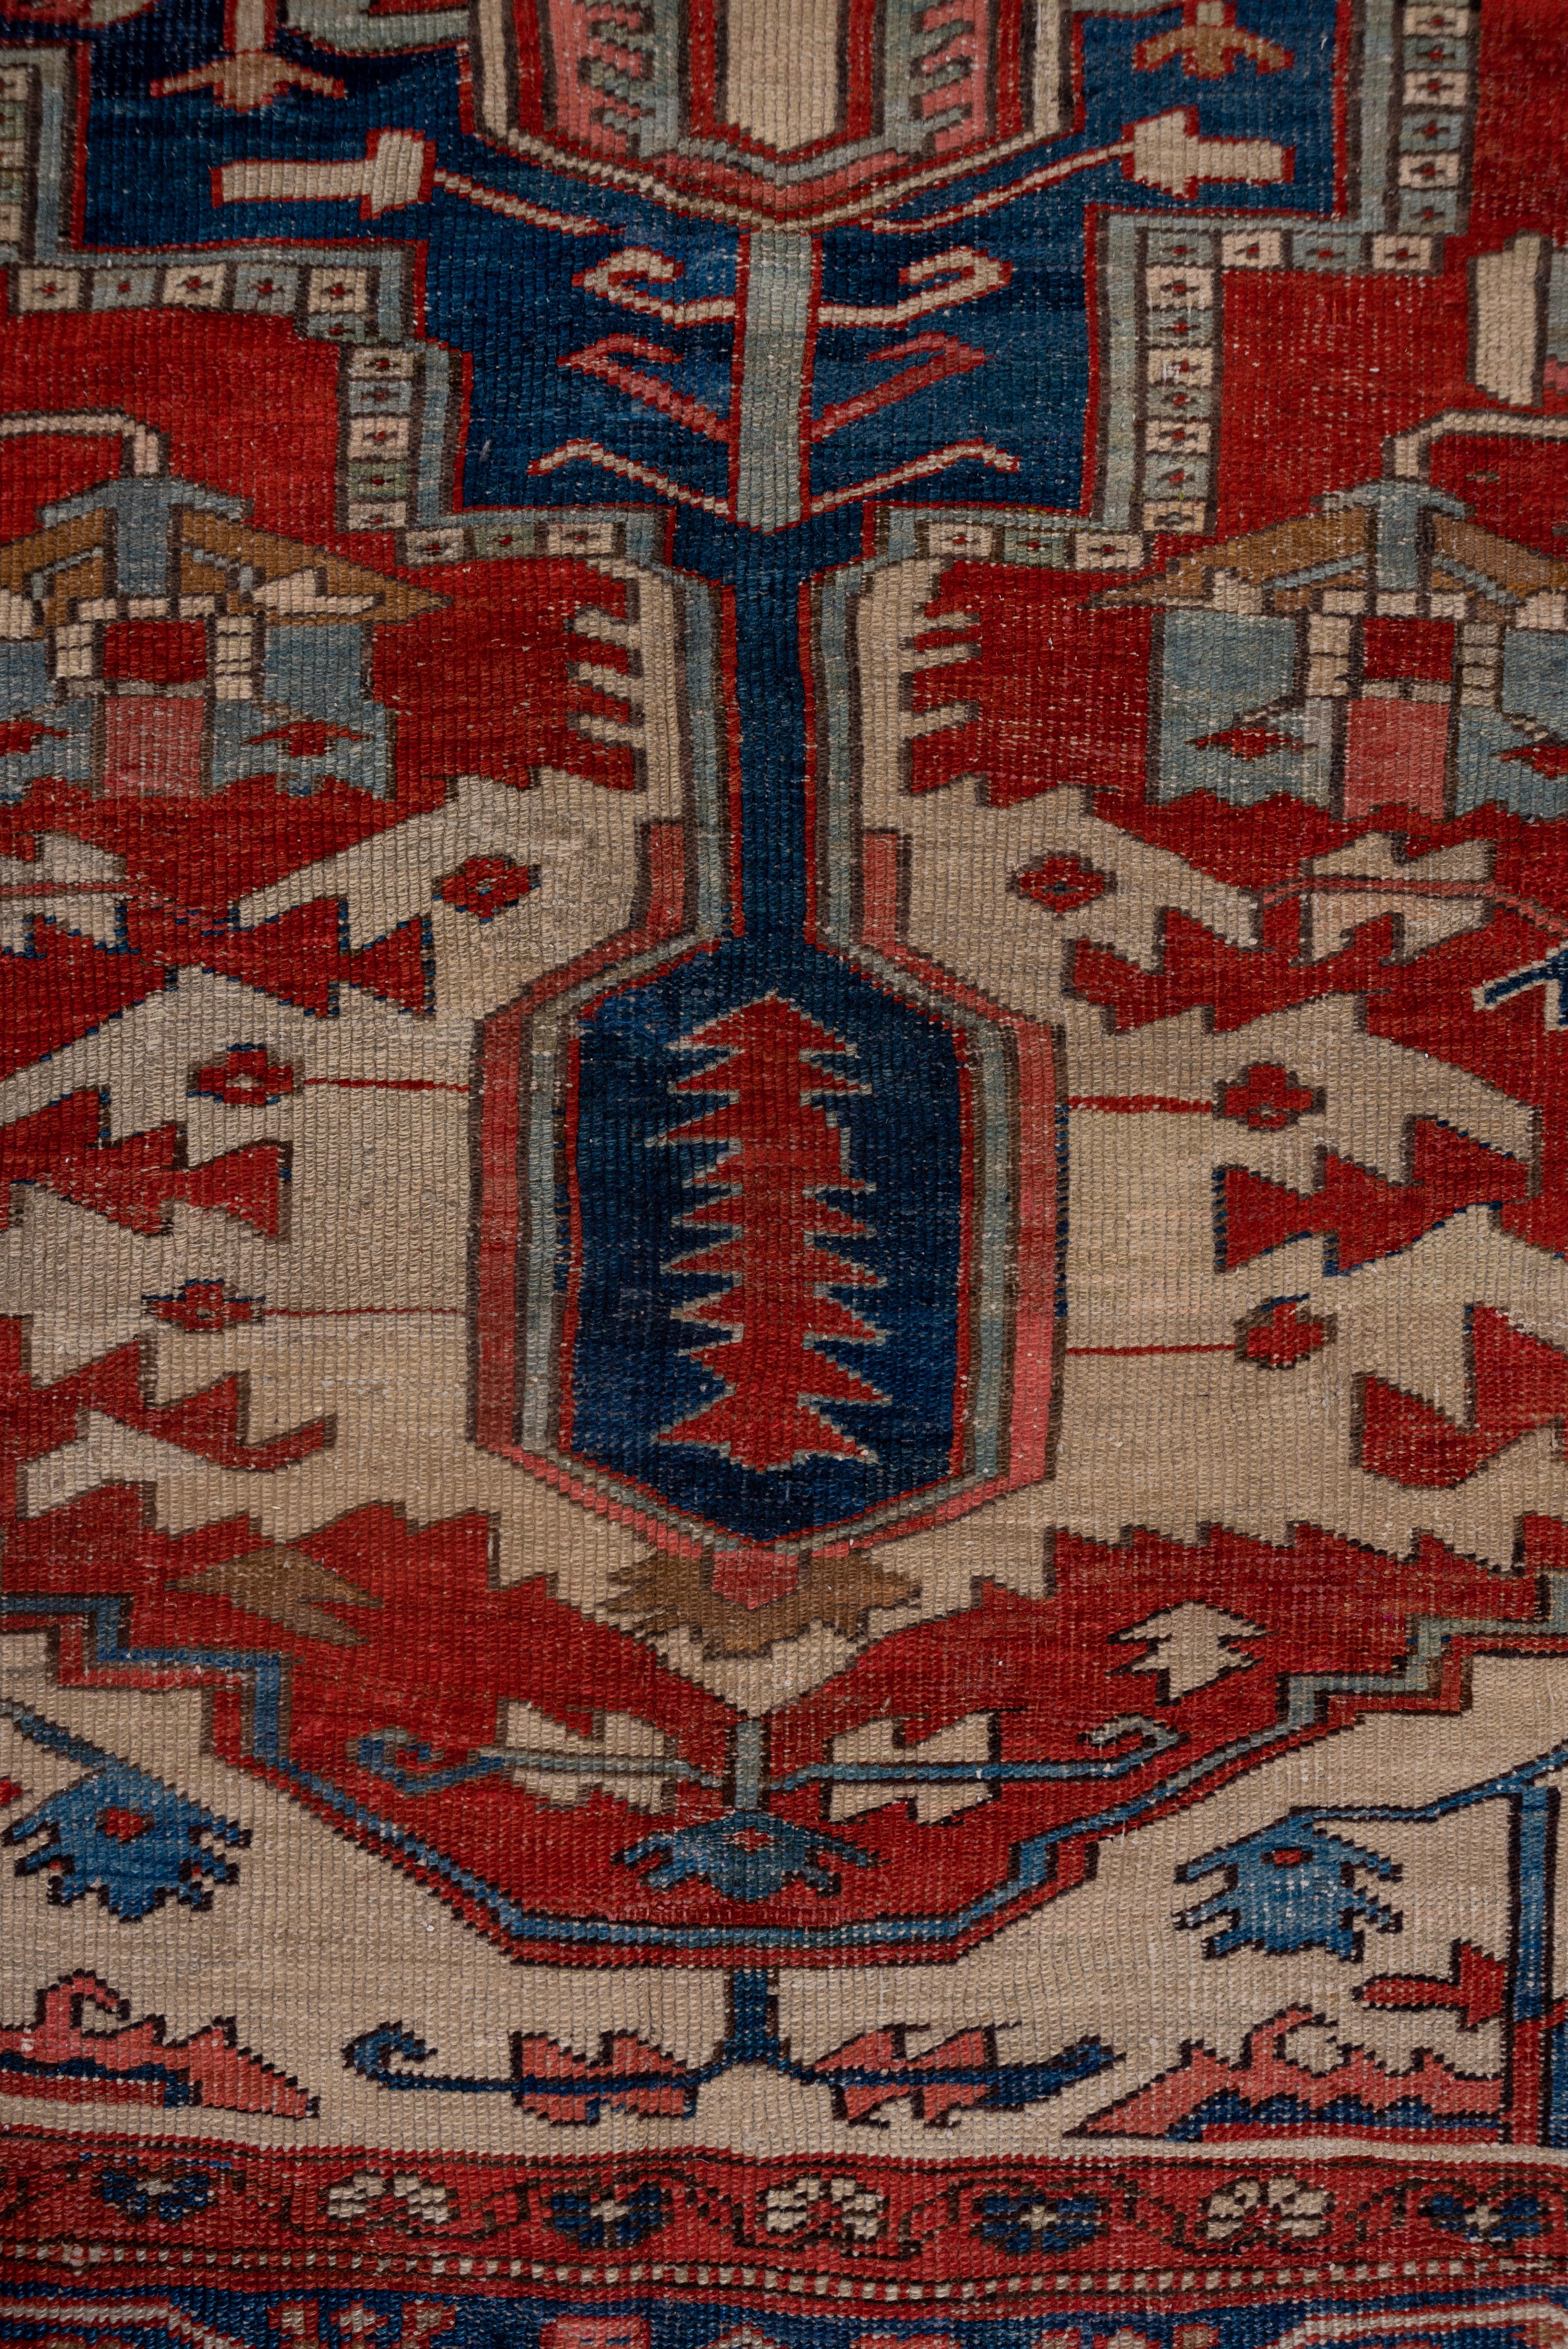 Classic Serapi quality NW Persian carpet with a natural dye palette and cotton foundation. The madder field shows a sometimes connected scatter of geometric leaves and flowers, centralized by a stepped blue medallion with dramatic sand ragged